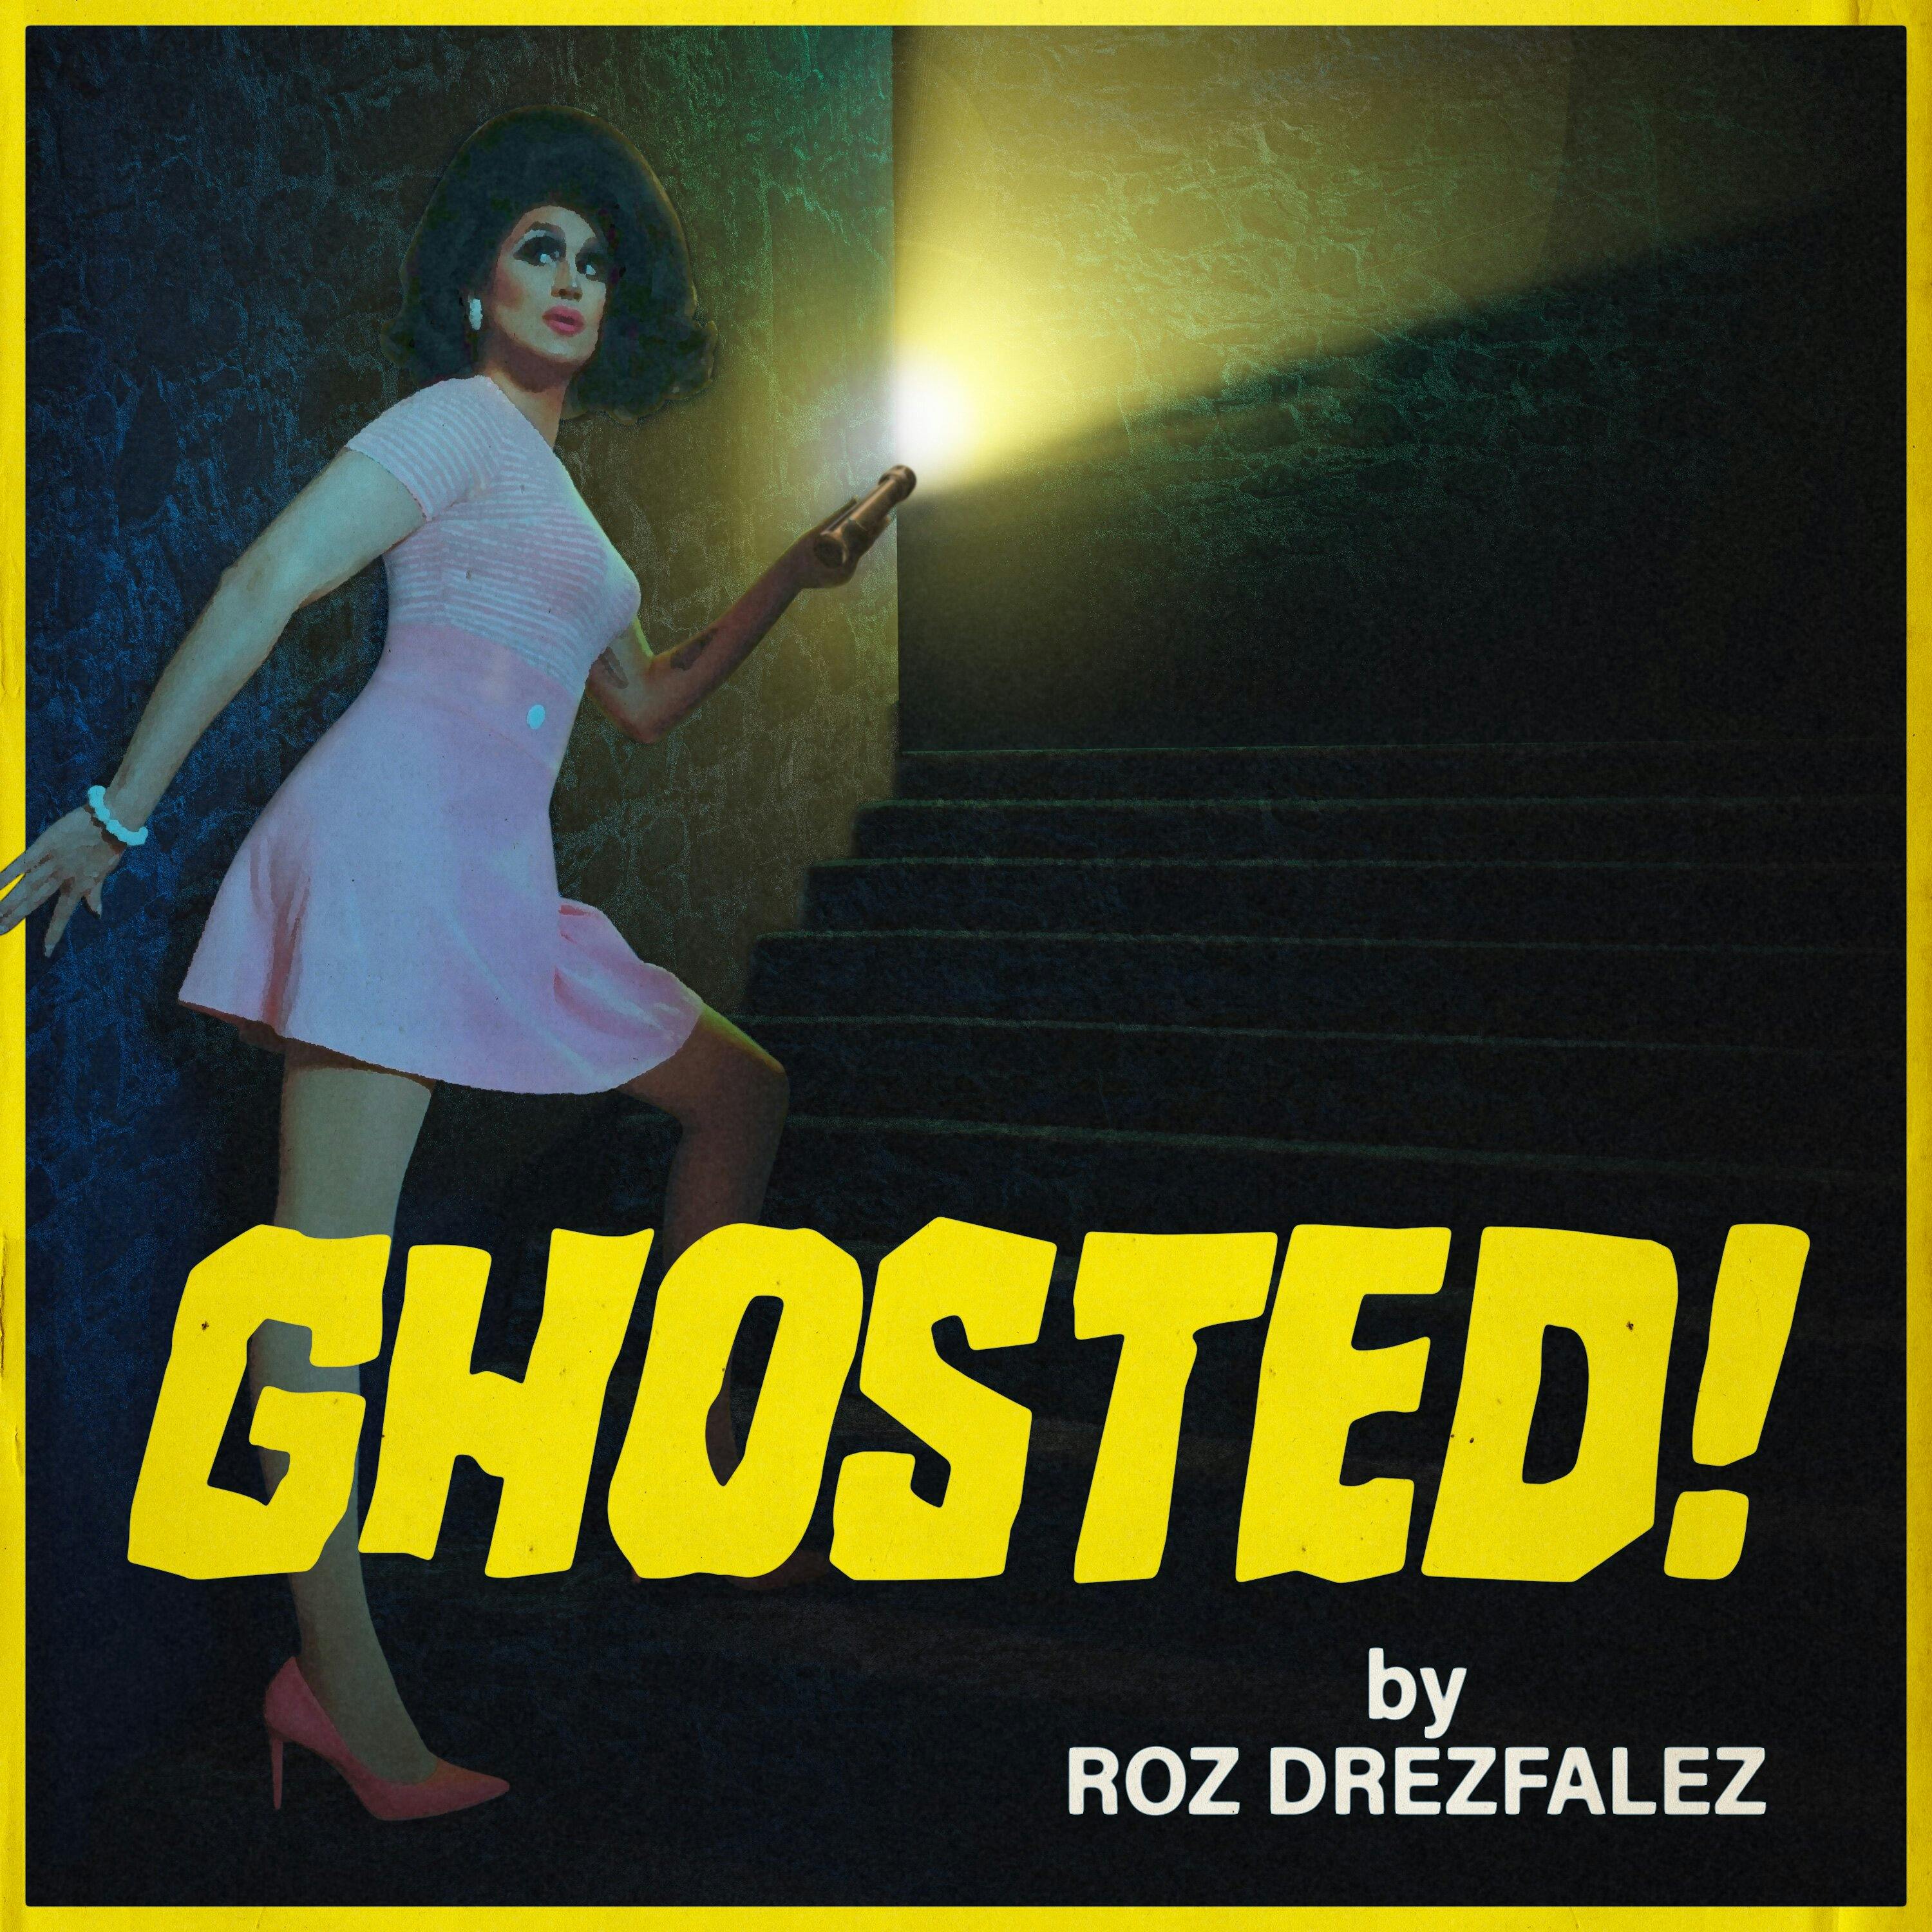 Introducing Ghosted by Roz Drezlafez